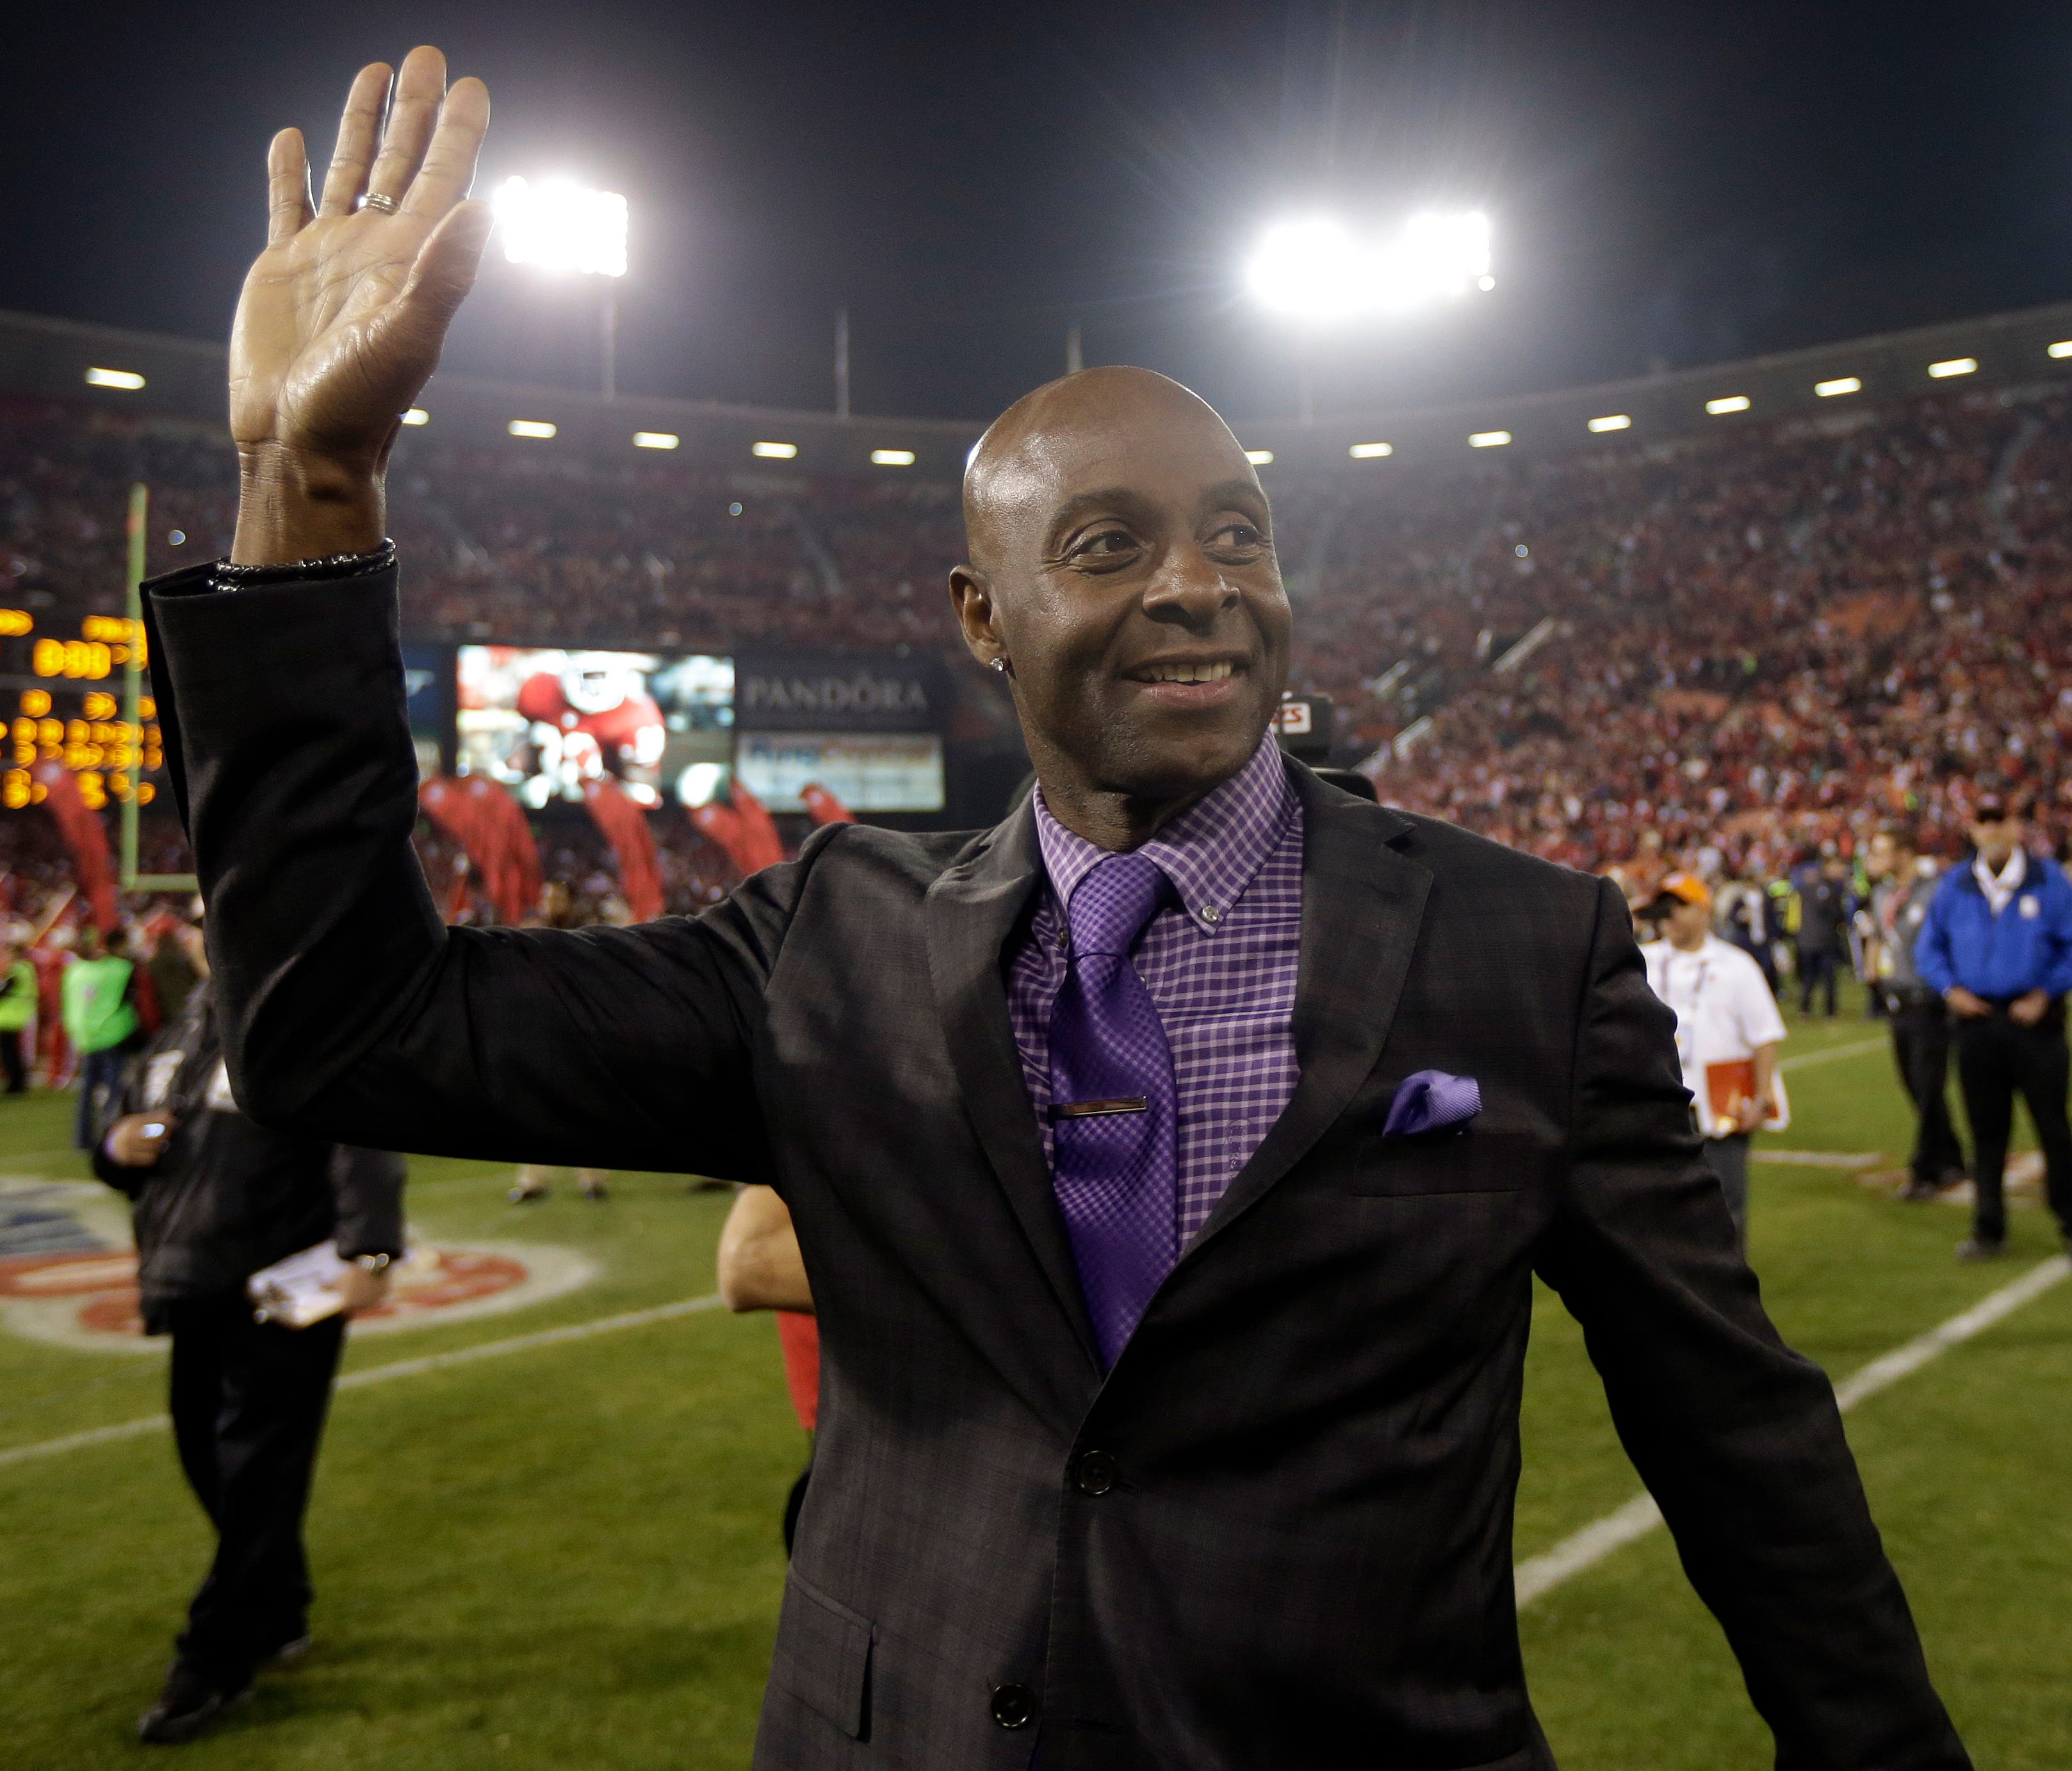 FILE - In this Dec. 23, 2013, file photo, former San Francisco 49ers player Jerry Rice waves to the crowd at Candlestick Park after an NFL football game between the 49ers and the Atlanta Falcons in San Francisco. Rice put on the cleats and took part 